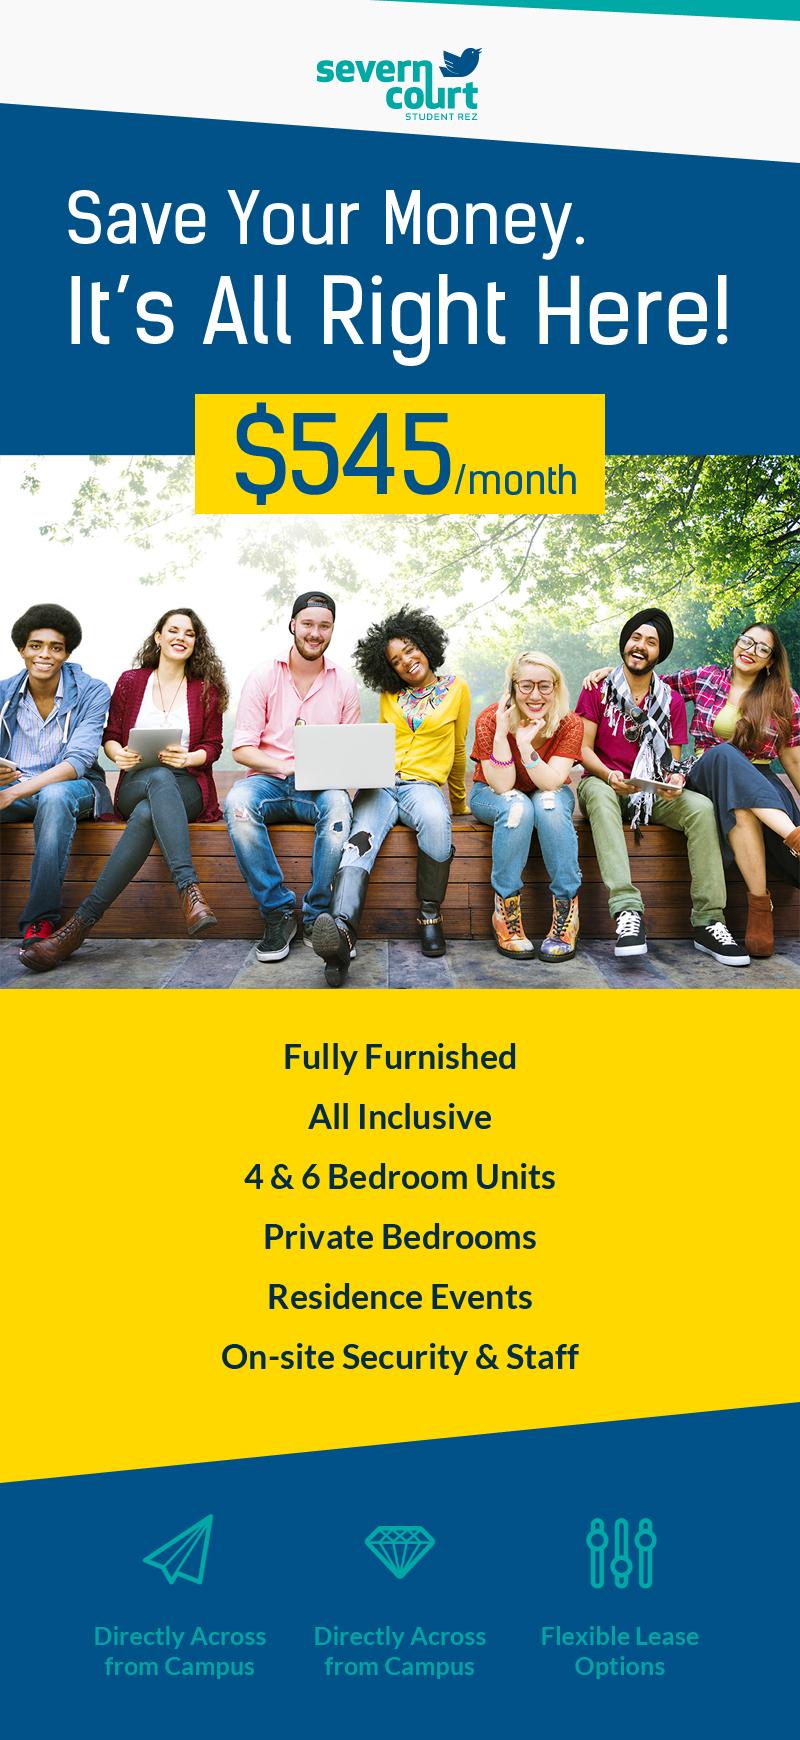 Hire Fully-furnished, All-Inclusive Student Housing